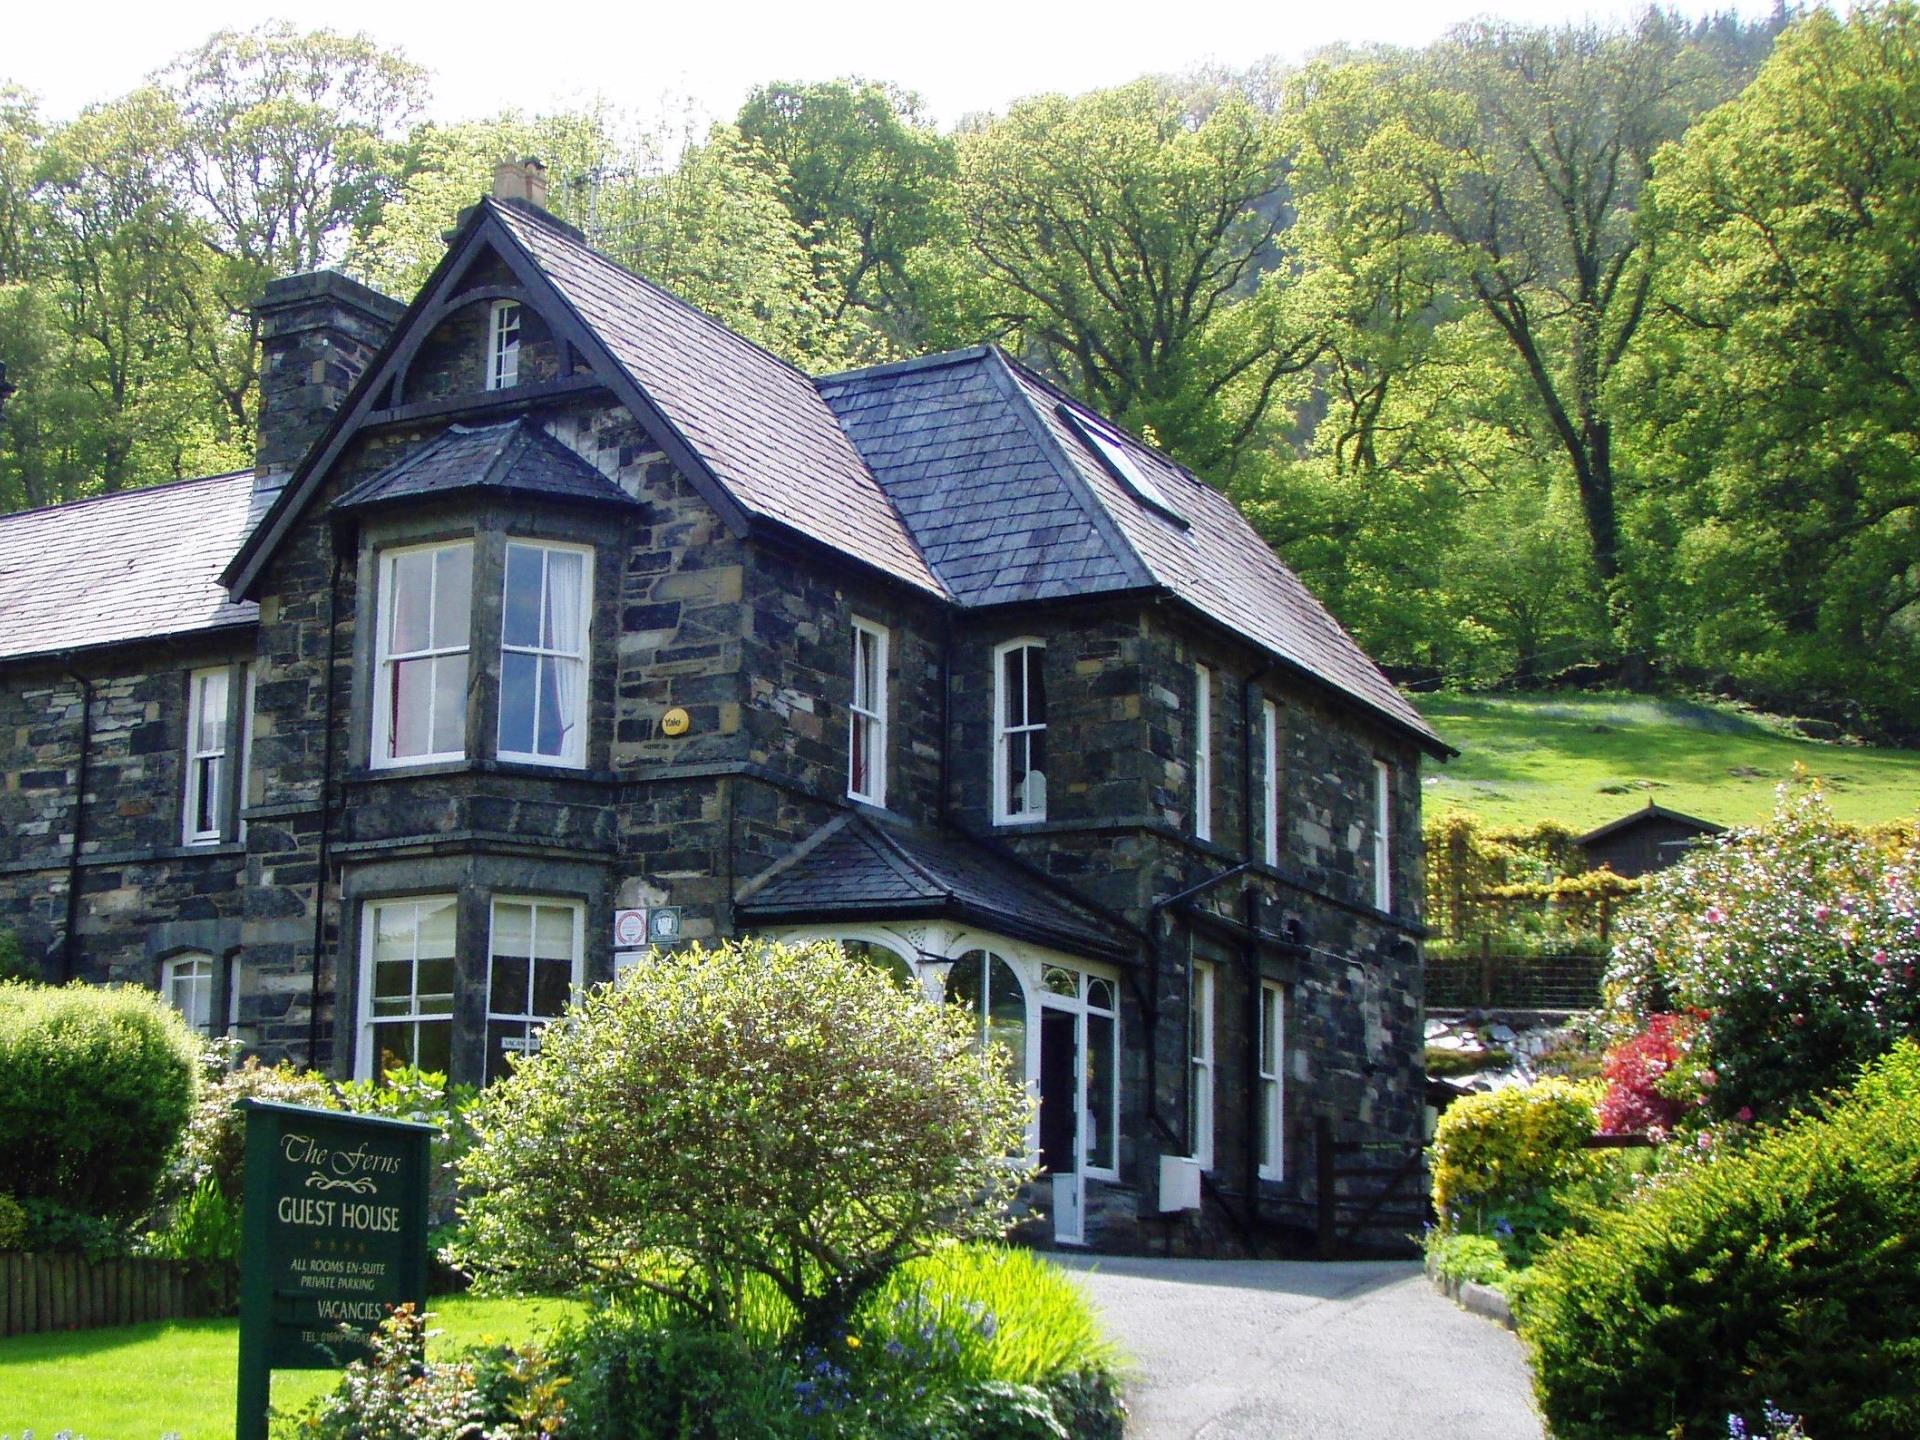 The Ferns Guesthouse, Betws-y-Coed